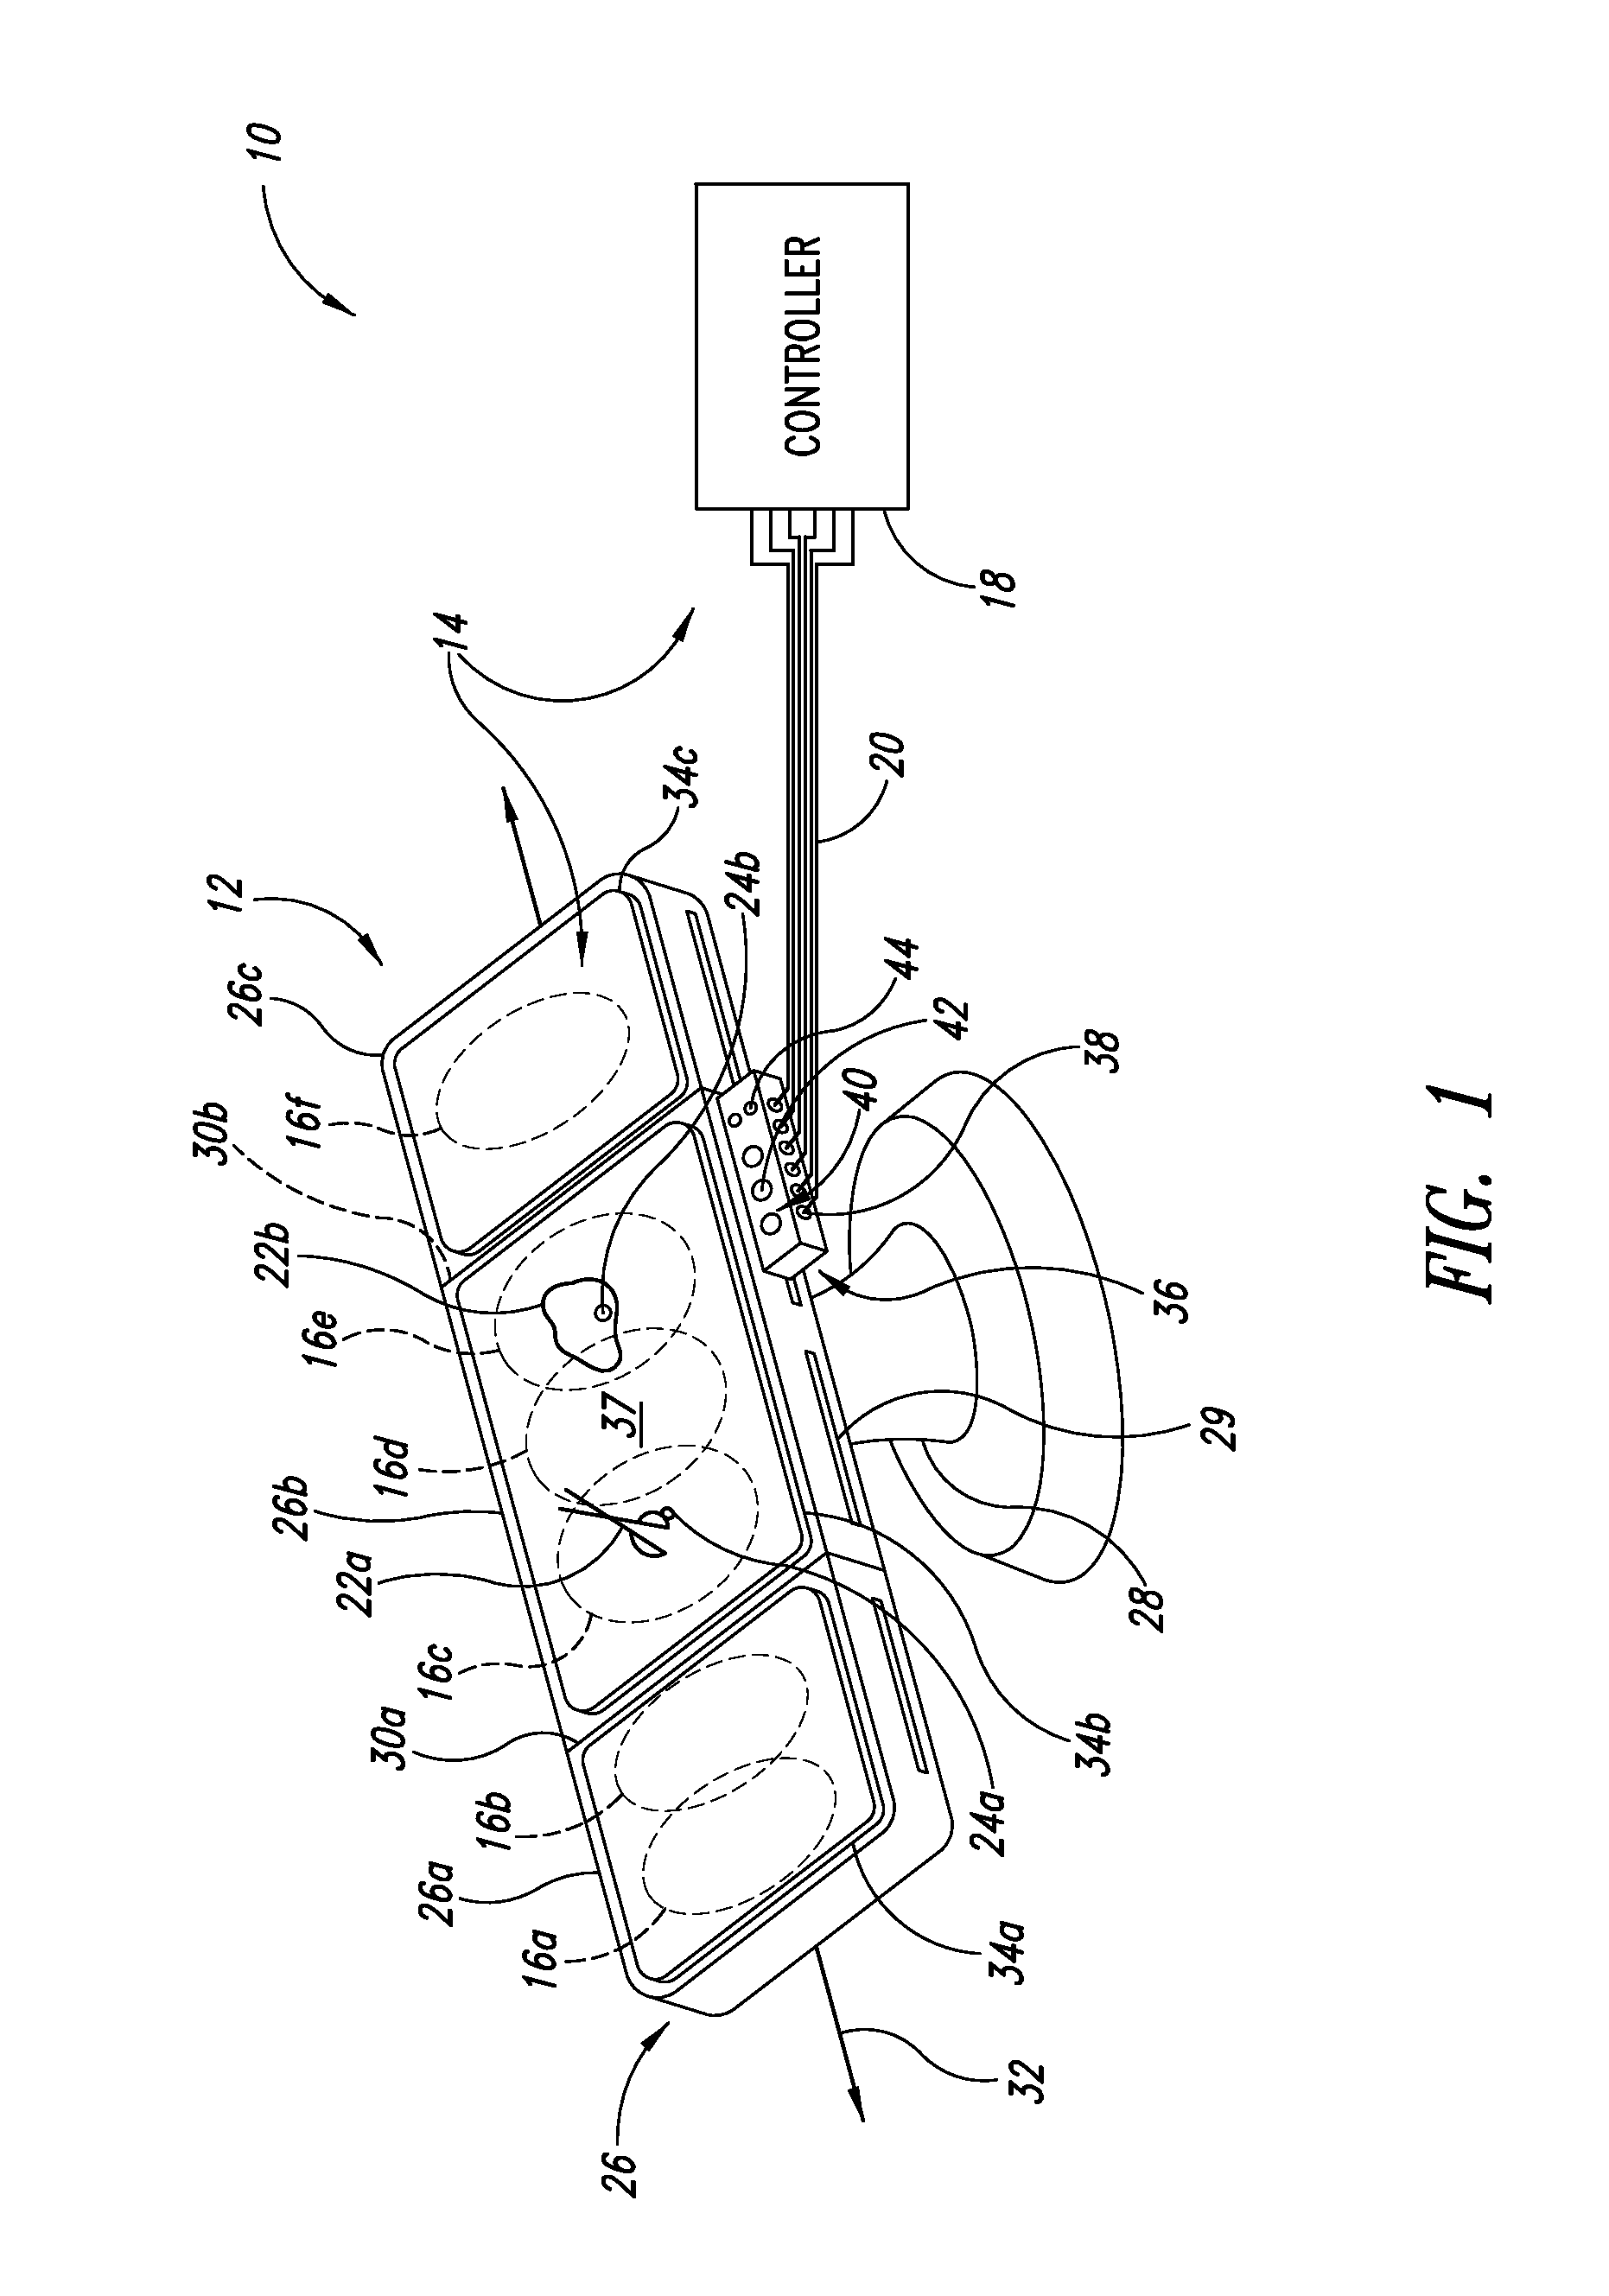 Method and apparatus to detect transponder tagged objects and to communicate with medical telemetry devices, for example during medical procedures